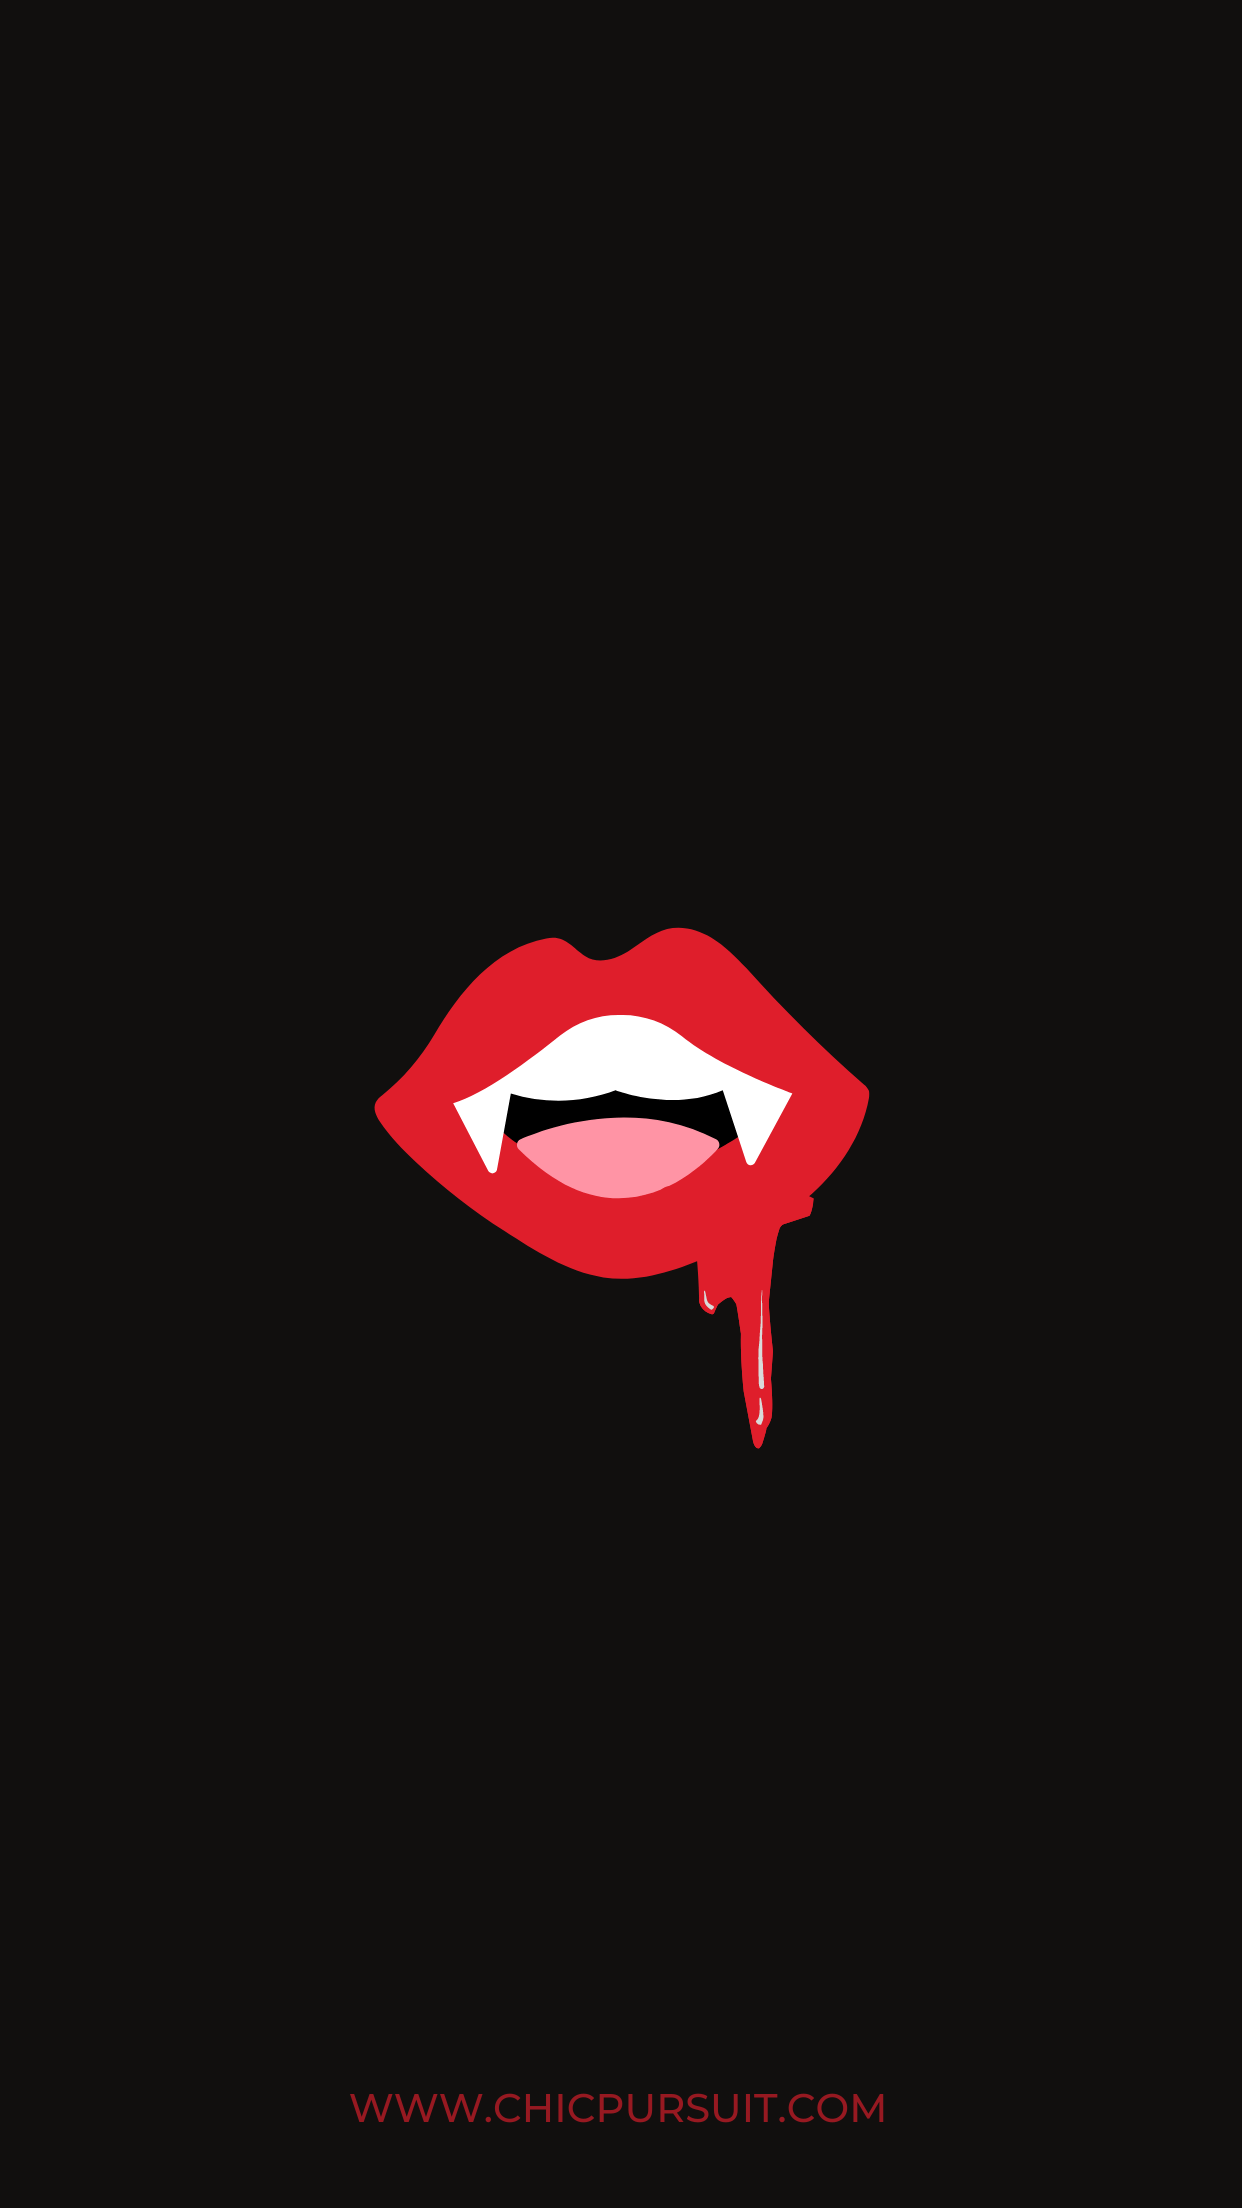 A vampire's mouth with blood on it - Spooky, vampire